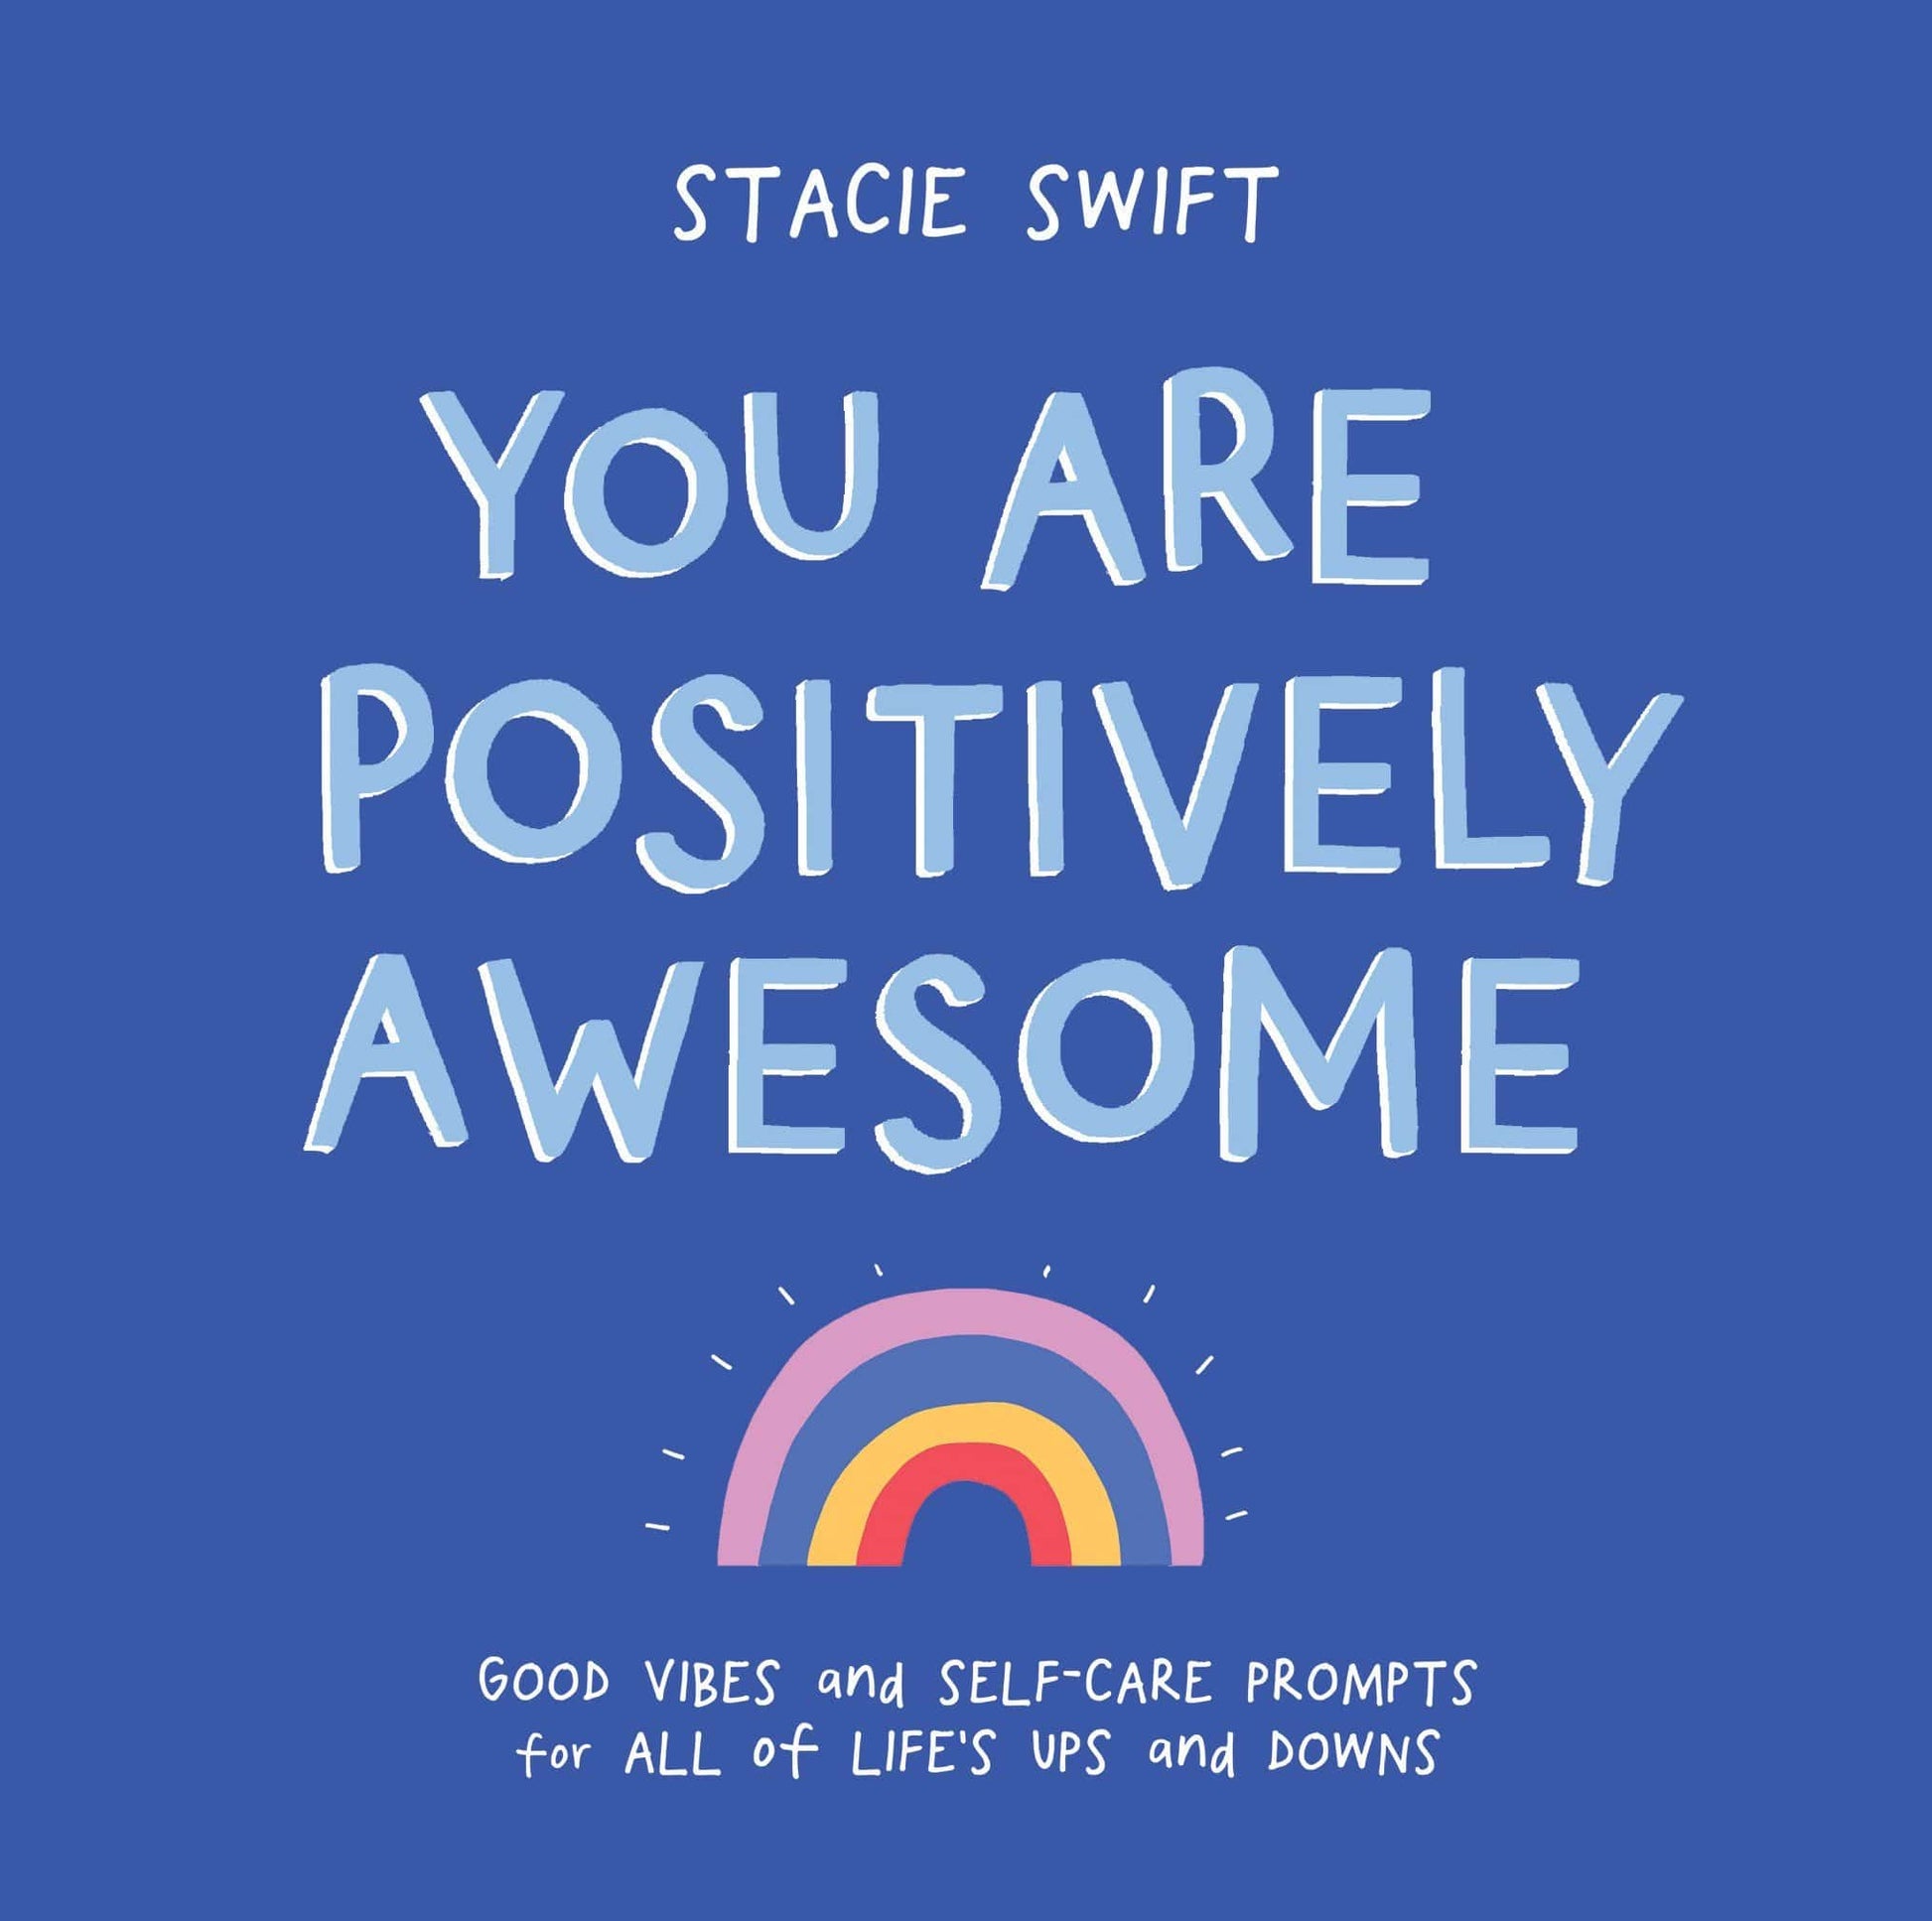 LibrairieRacines You Are Positively Awesome: Good Vibes and Self-Care Prompts for All of Life's Ups and Downs By Stacie Swift